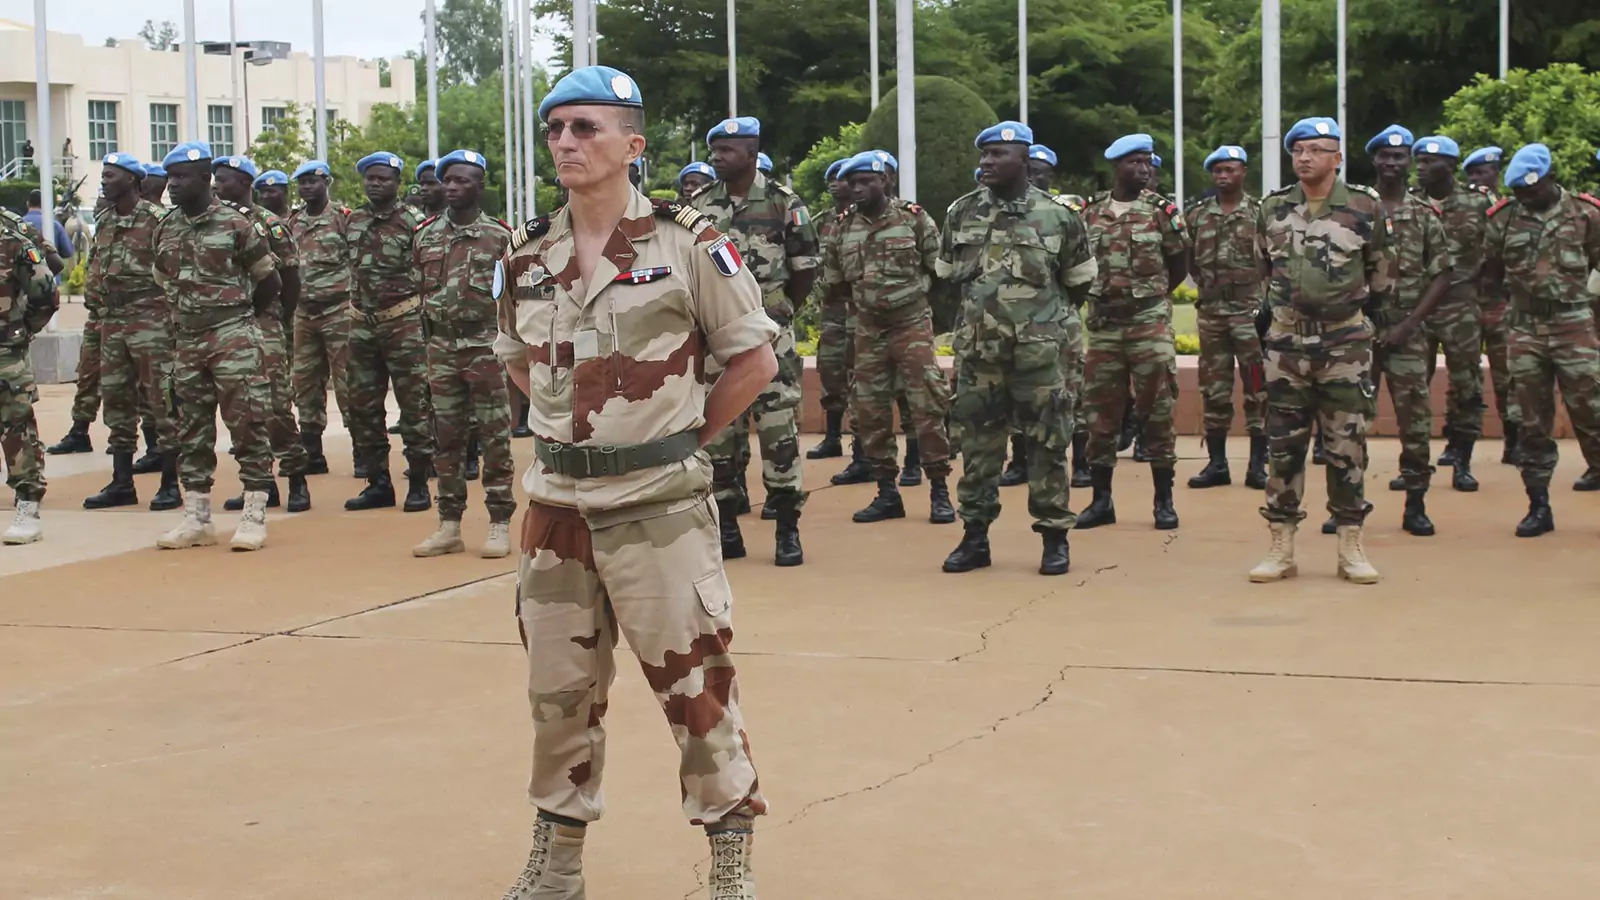 UN peacekeepers mark the start of the 12,000-strong UN peacekeeping mission (MINUSMA) in Mali, in Bamako on July 1, 2013.